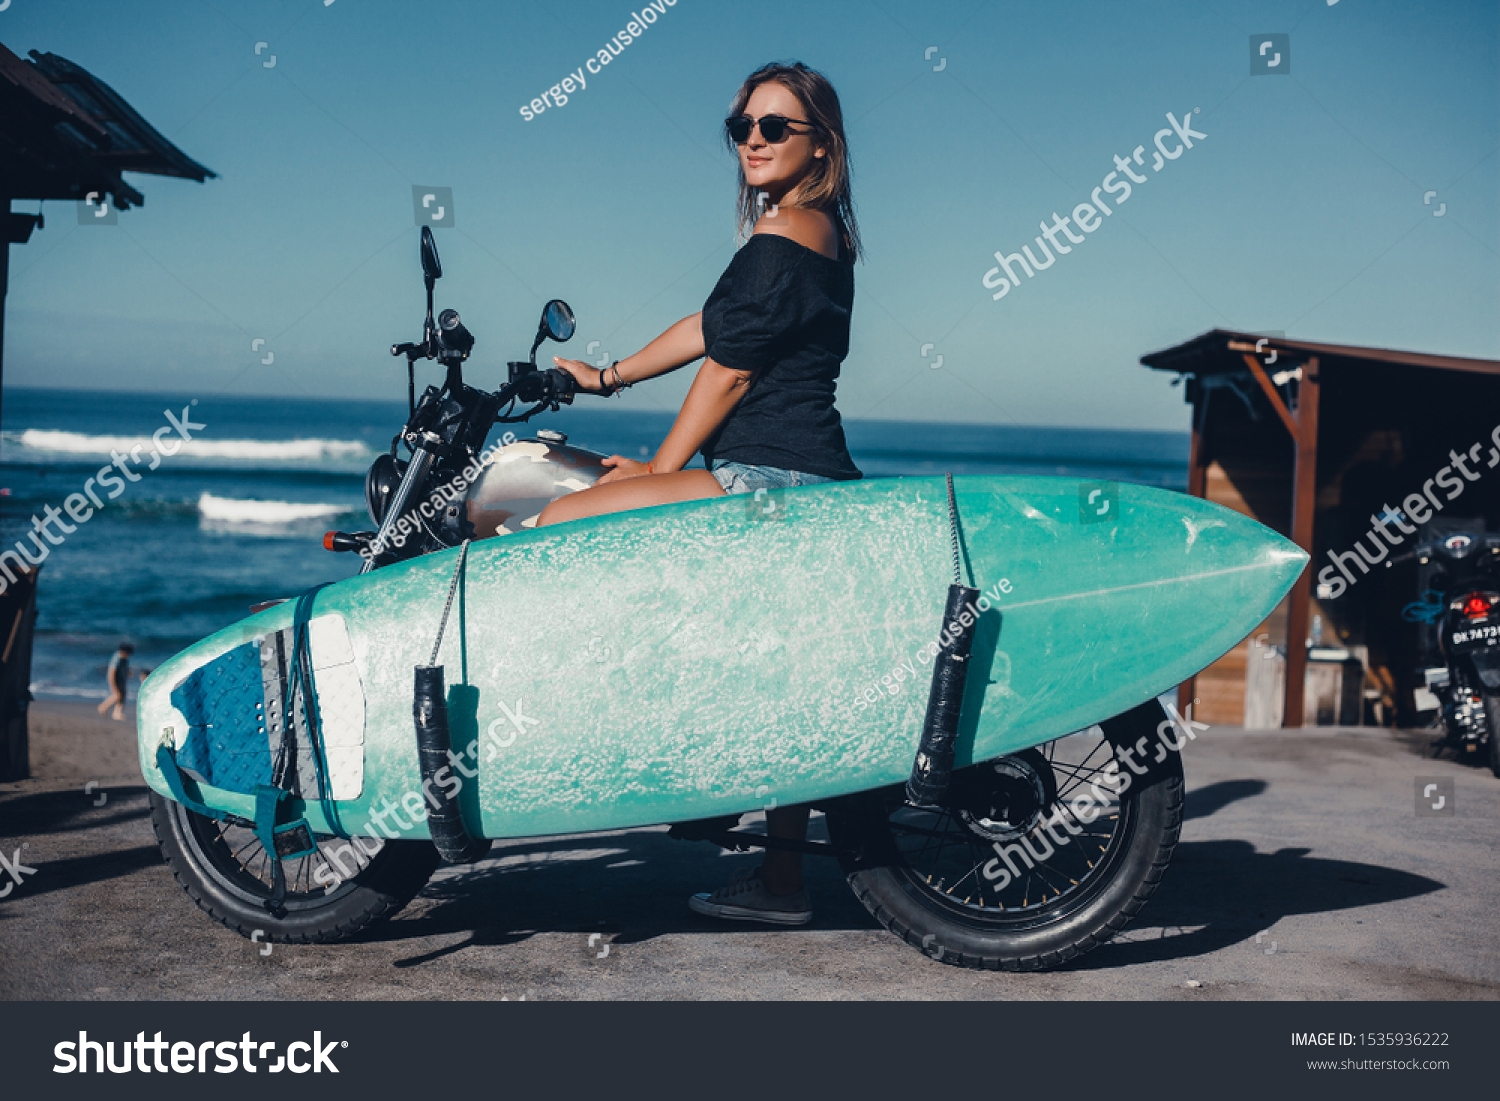 Beauty woman using custom old motorcycle, outdoor hipster portrait,surfboard,brutal girl, sunglasses, hipsters in stylish clothing for a retro motorcycle on the street,beach, surfboard, longboard,Bali #1535936222